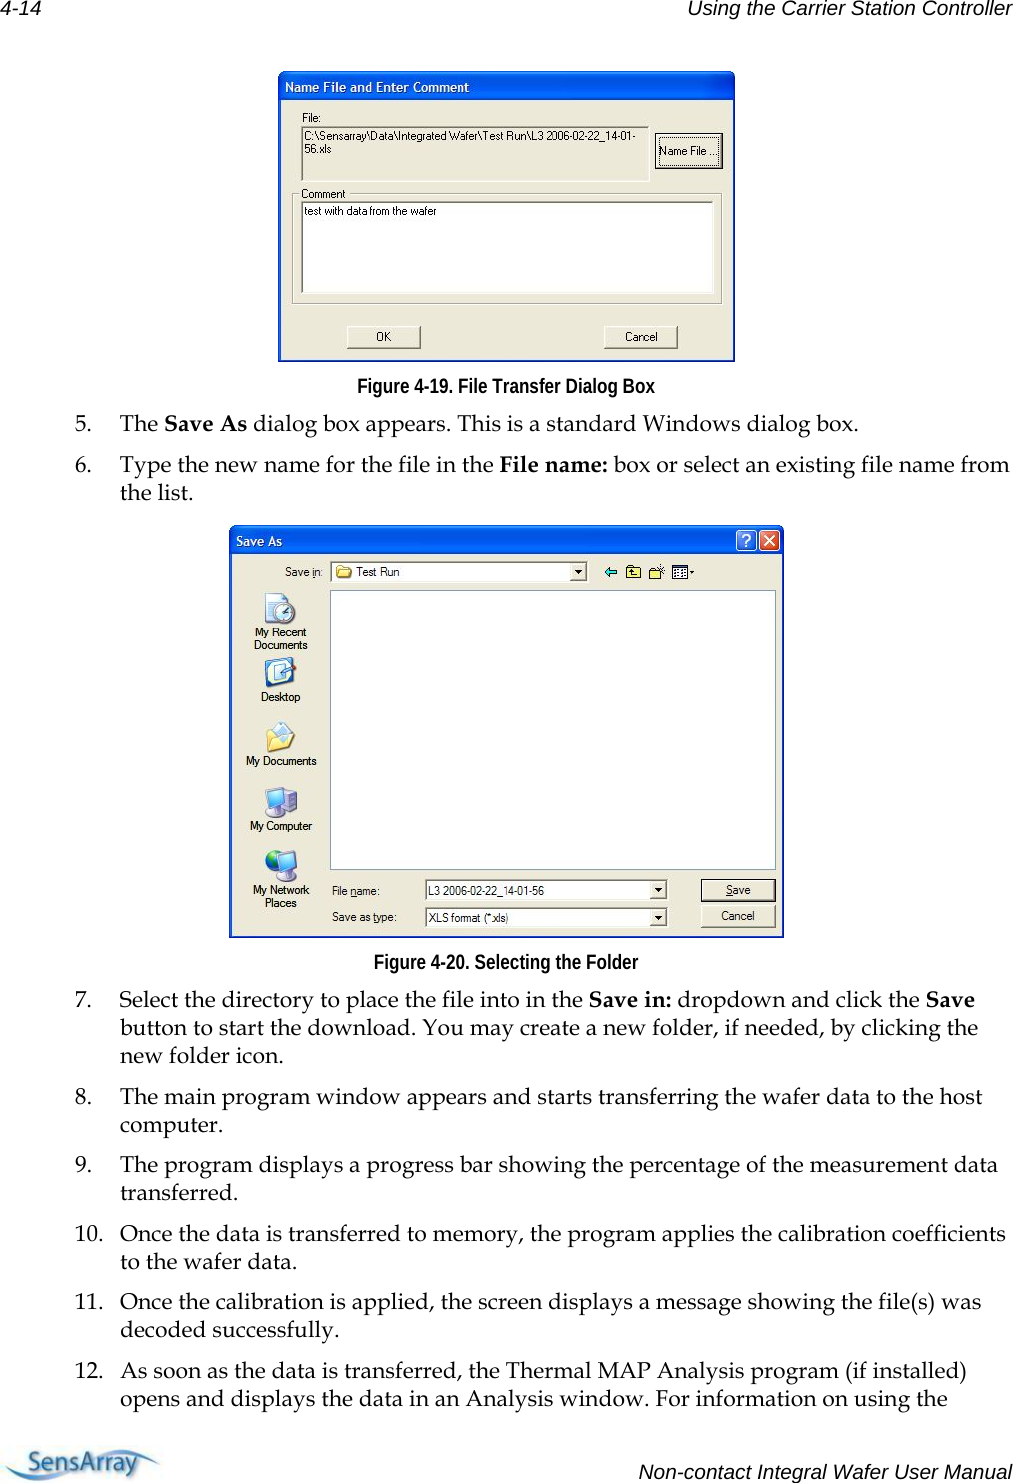 4-14  Using the Carrier Station Controller   Figure 4-19. File Transfer Dialog Box 5. The Save As dialog box appears. This is a standard Windows dialog box. 6. Type the new name for the file in the File name: box or select an existing file name from the list.  Figure 4-20. Selecting the Folder 7. Select the directory to place the file into in the Save in: dropdown and click the Save button to start the download. You may create a new folder, if needed, by clicking the new folder icon. 8. The main program window appears and starts transferring the wafer data to the host computer. 9. The program displays a progress bar showing the percentage of the measurement data transferred. 10. Once the data is transferred to memory, the program applies the calibration coefficients to the wafer data. 11. Once the calibration is applied, the screen displays a message showing the file(s) was decoded successfully. 12. As soon as the data is transferred, the Thermal MAP Analysis program (if installed) opens and displays the data in an Analysis window. For information on using the   Non-contact Integral Wafer User Manual 